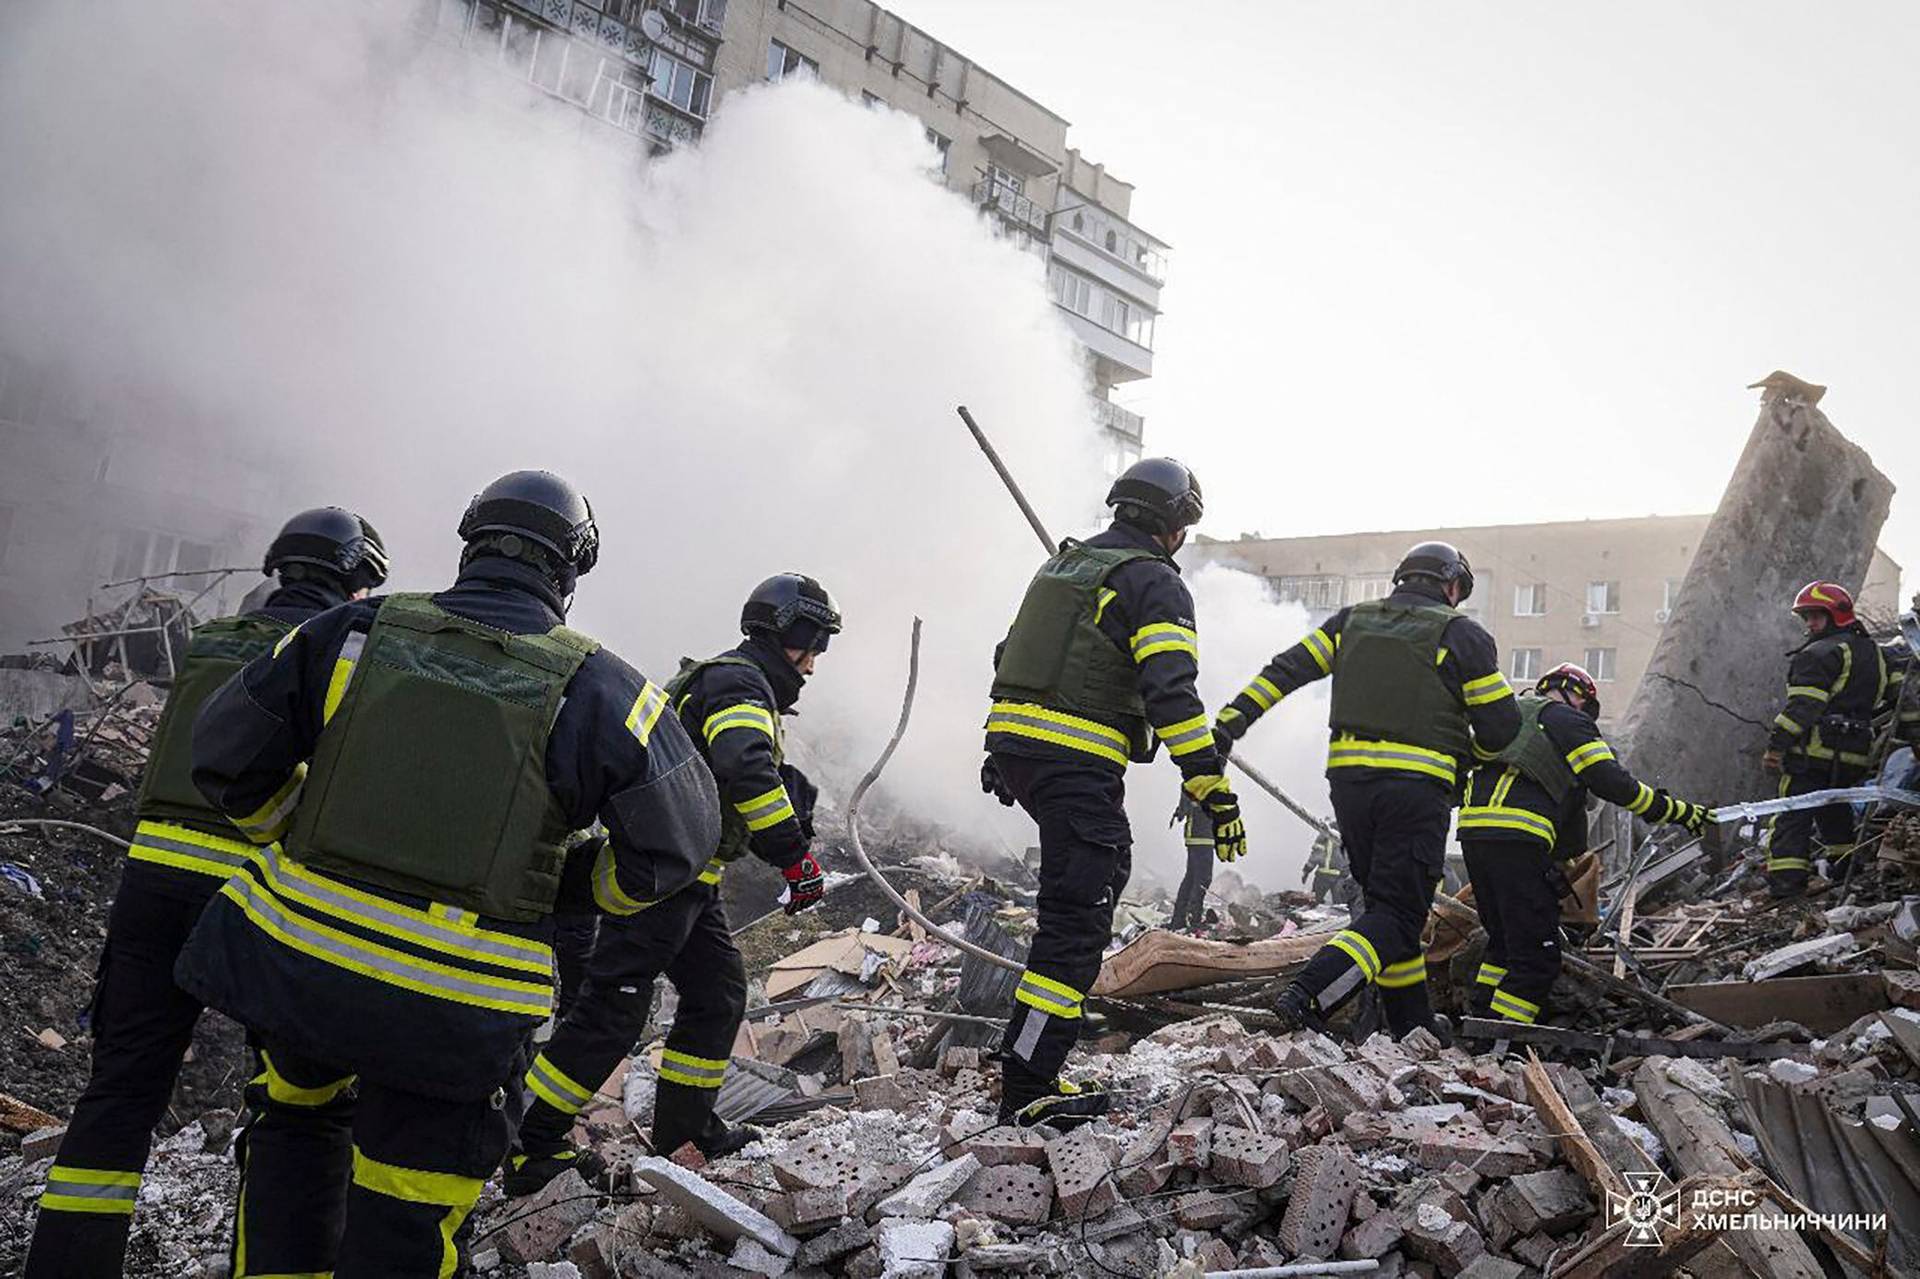 Rescuers work at a site of residential buildings heavily damaged by a Russian missile strike in Khmelnytskyi